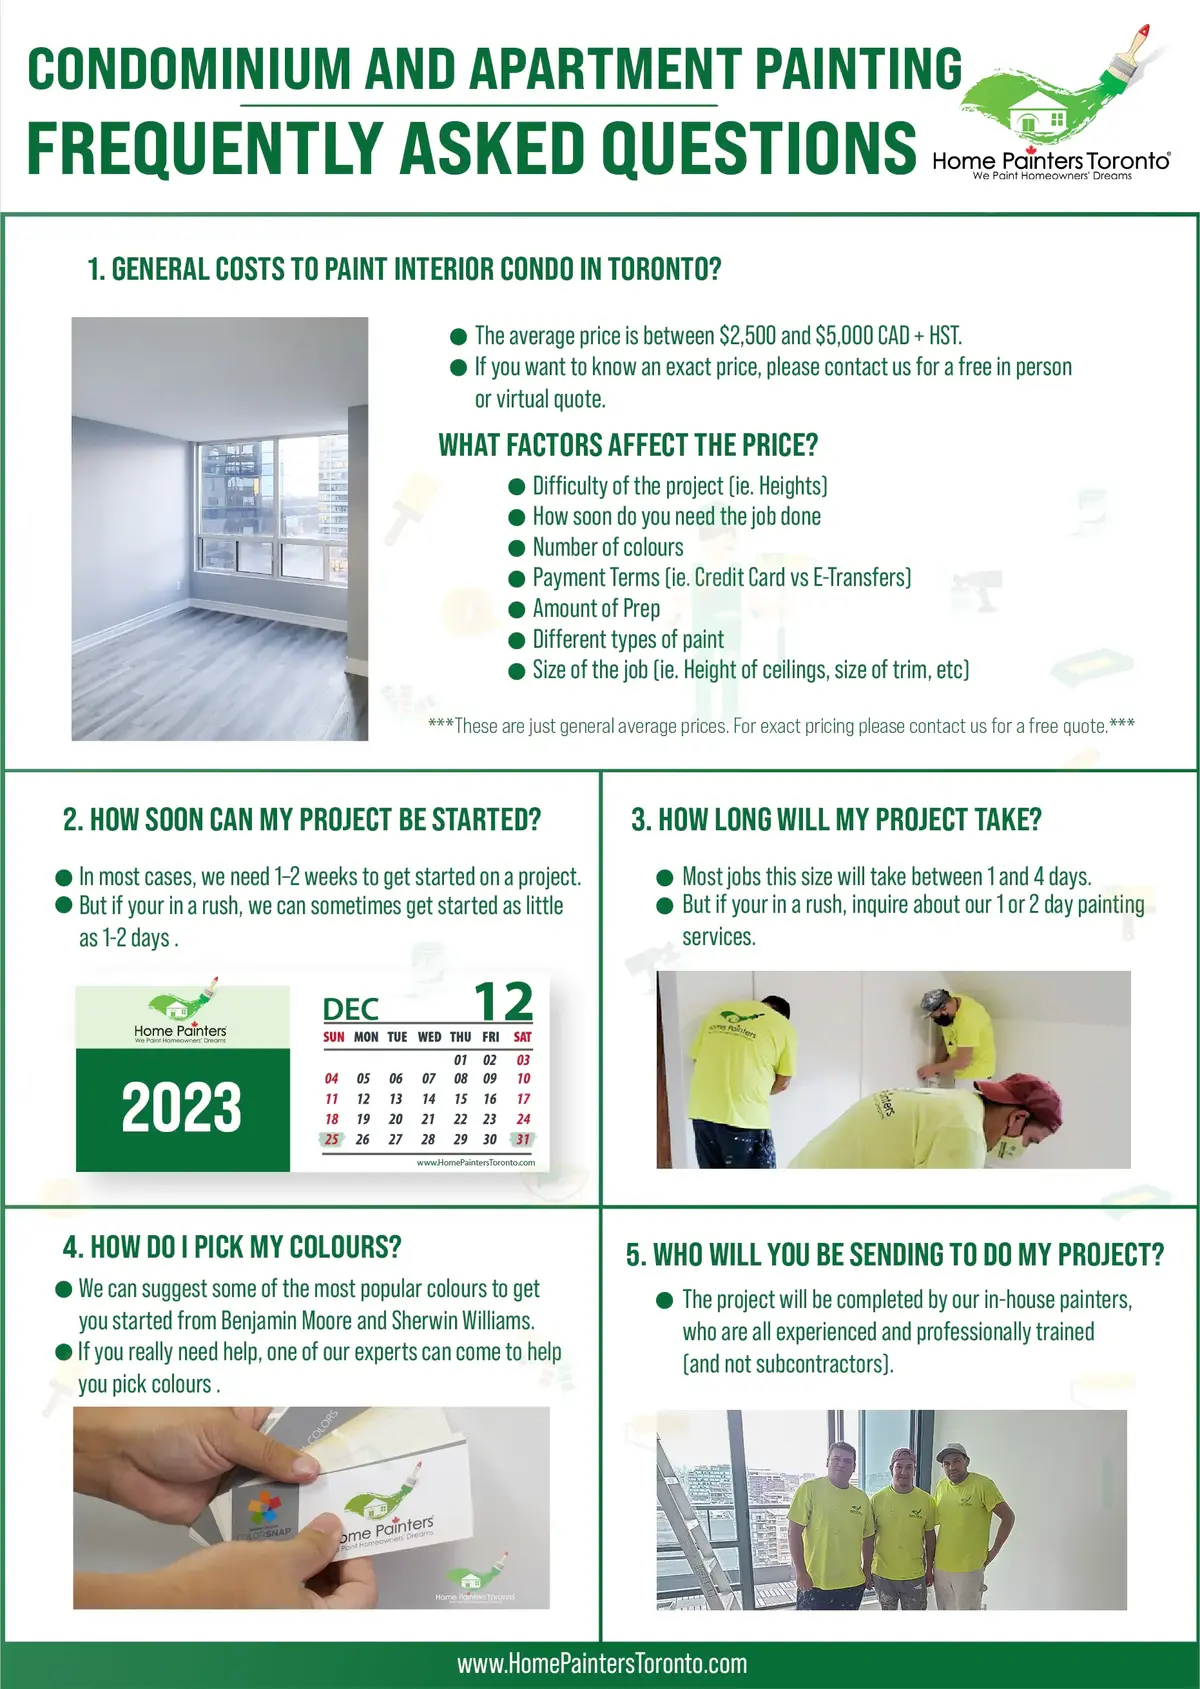 Infographic of frequently asked questions about condominium and apartment painting